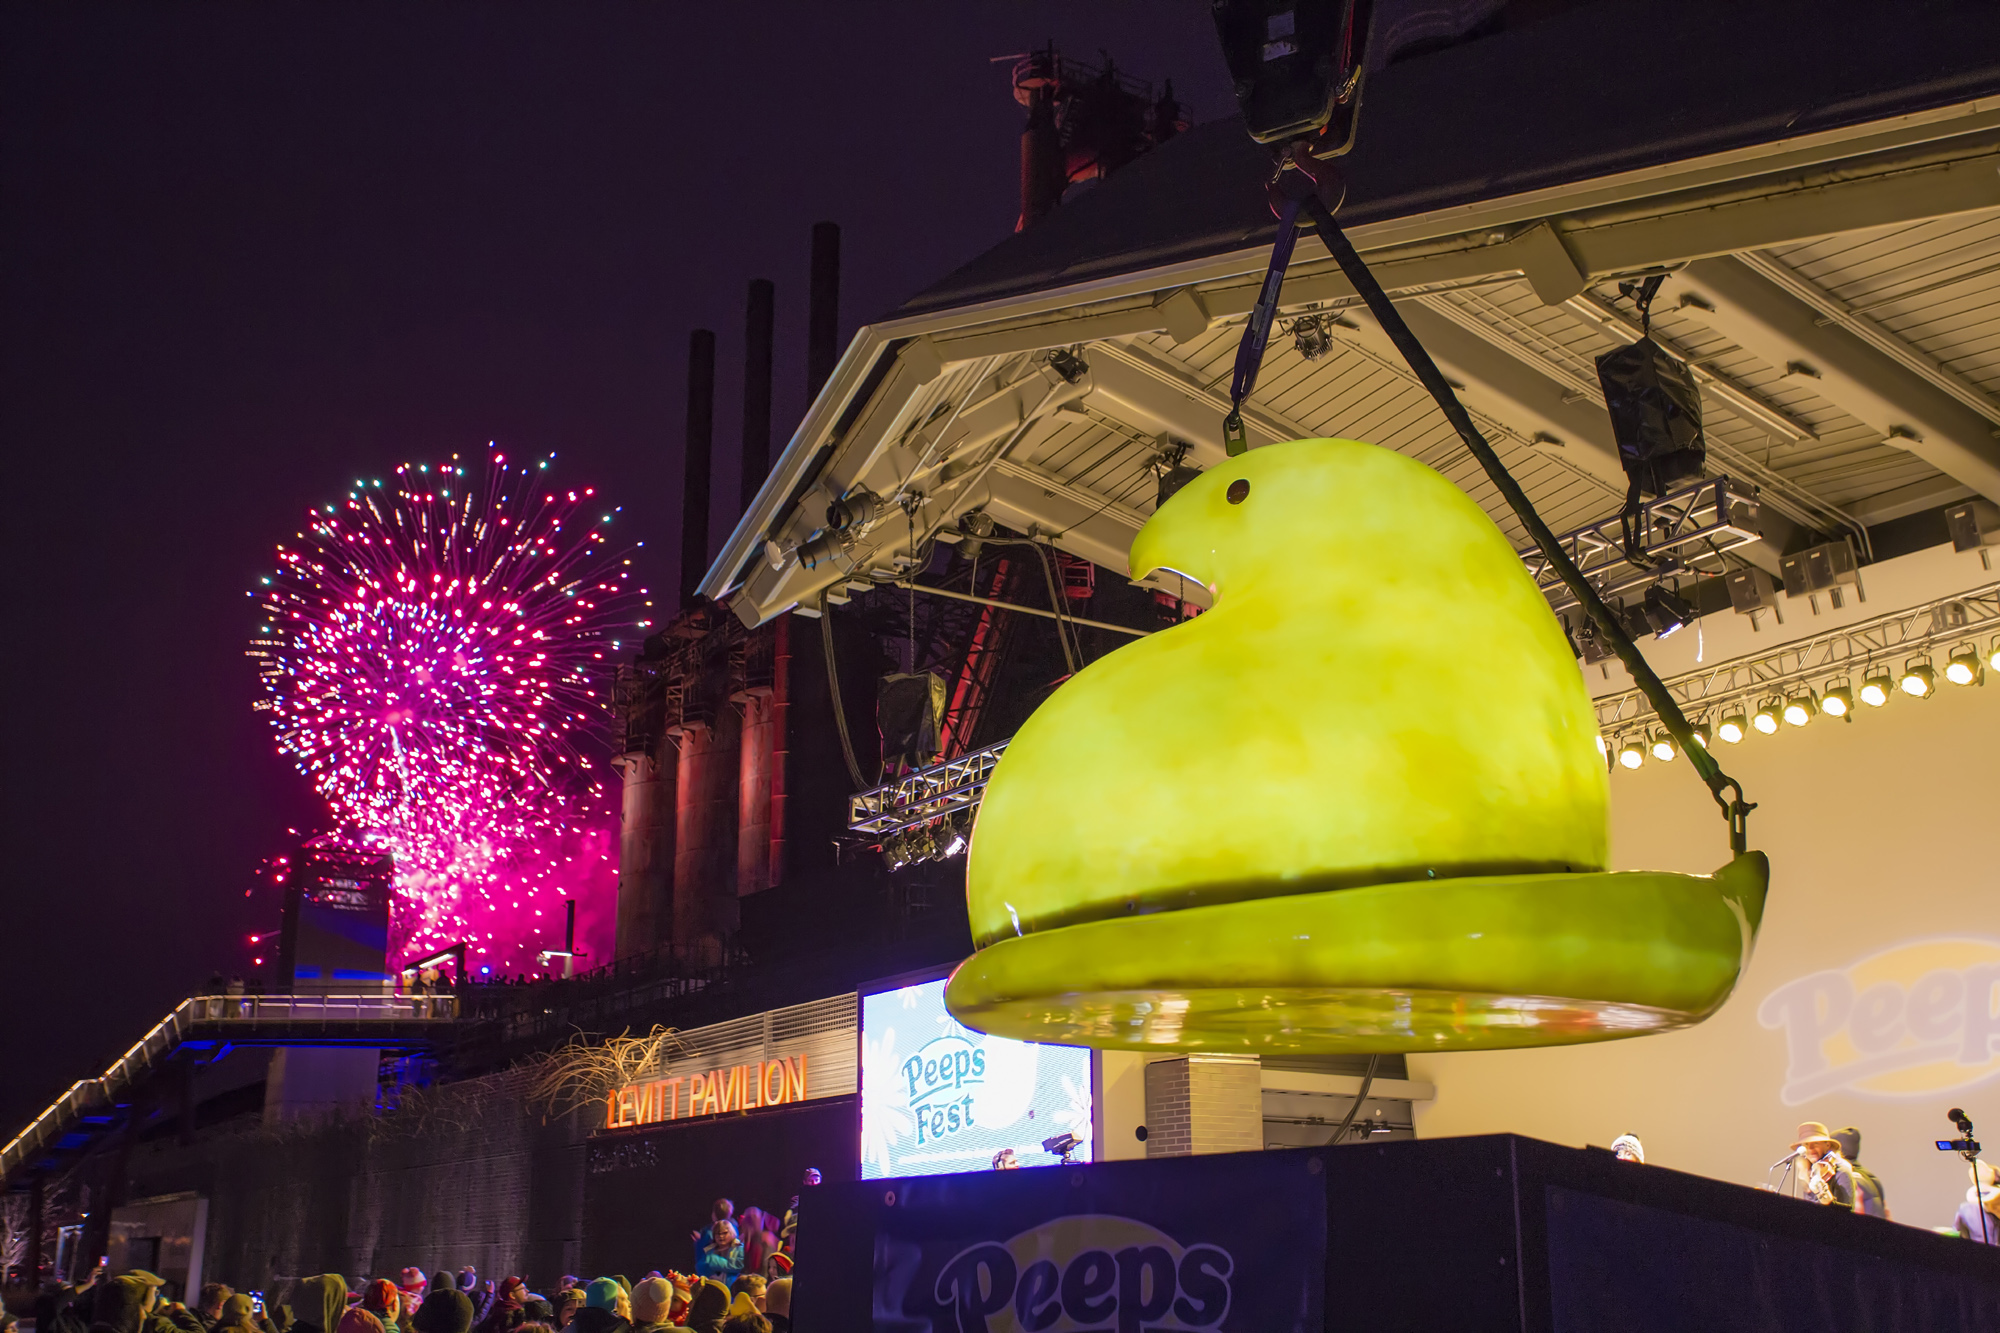 Celebrate the New Year with 400pound Peeps drop during PeepsFest in